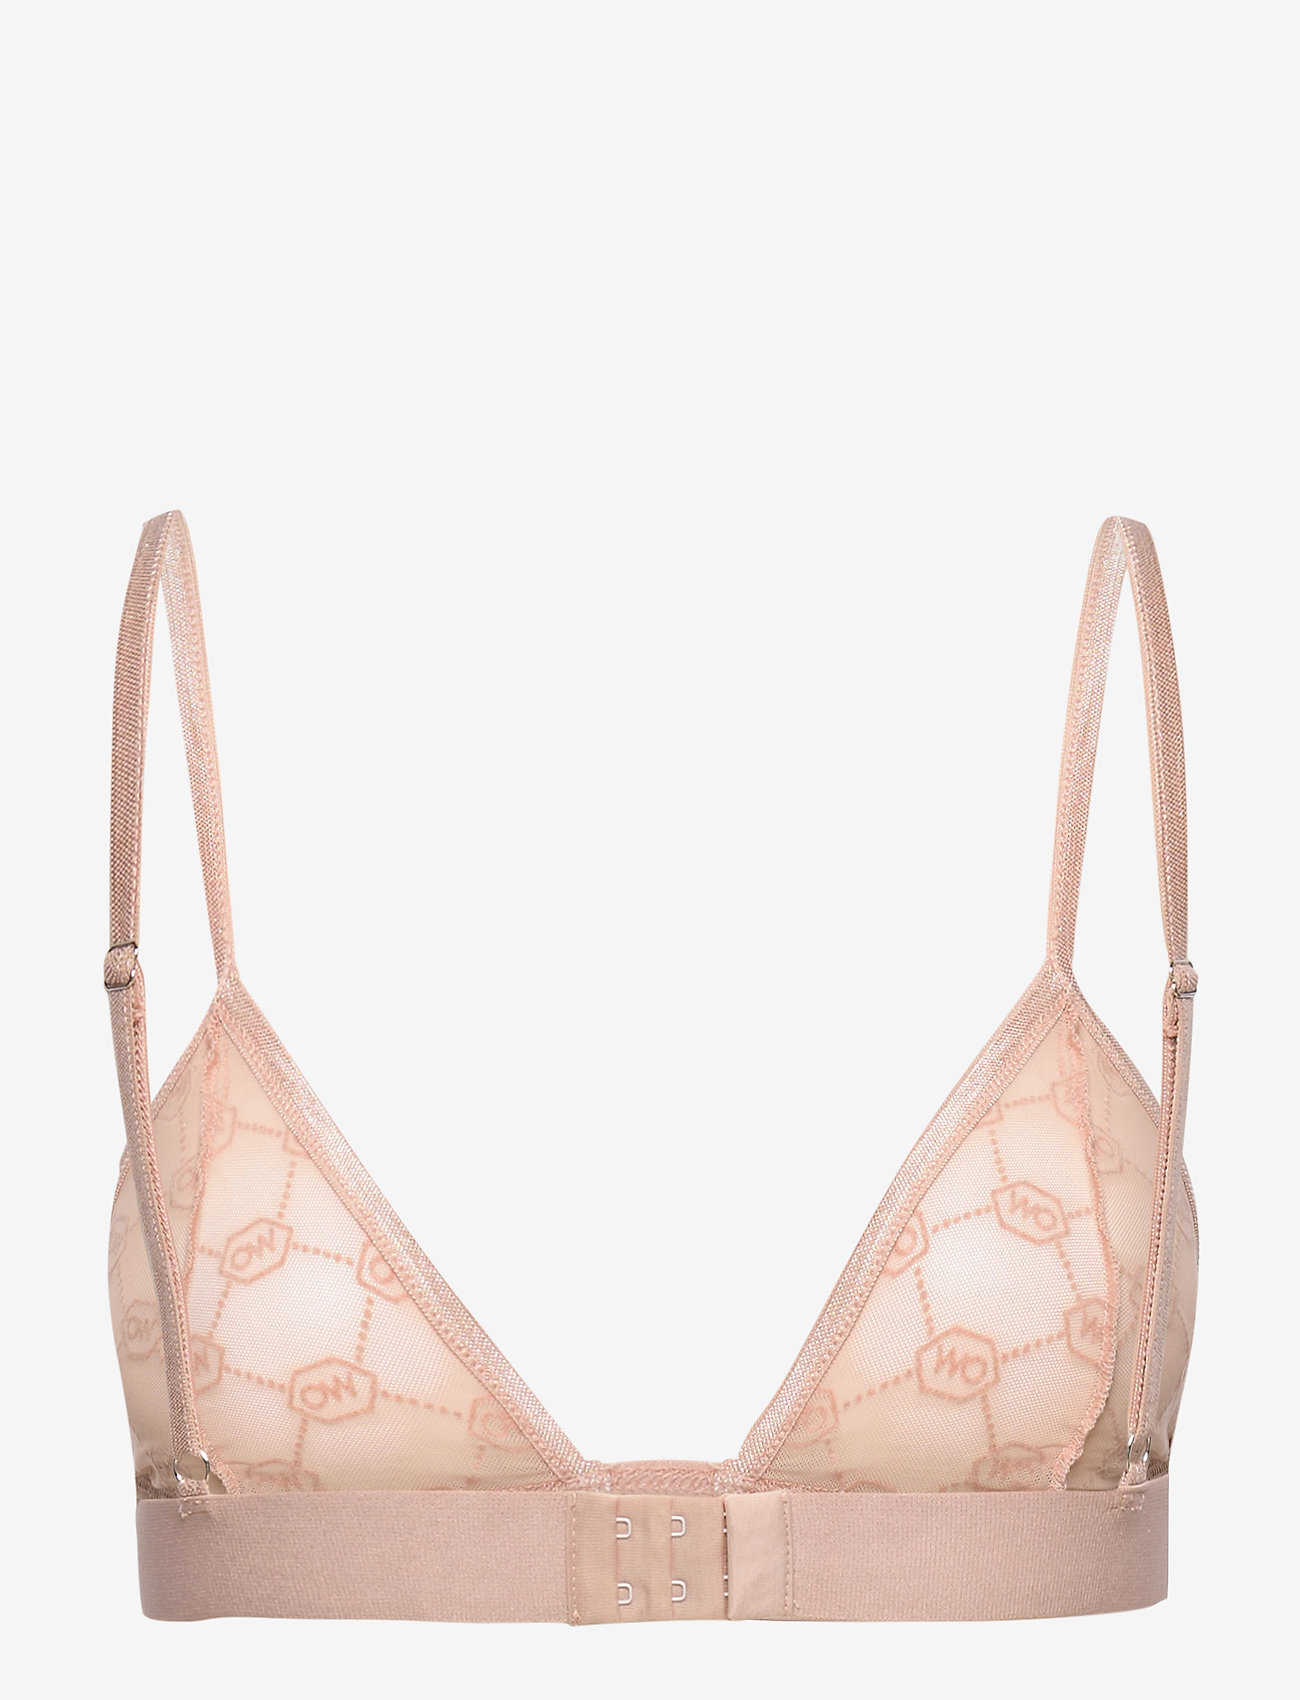 OW Collection - MONA Bra - bralette - rose nude - 1